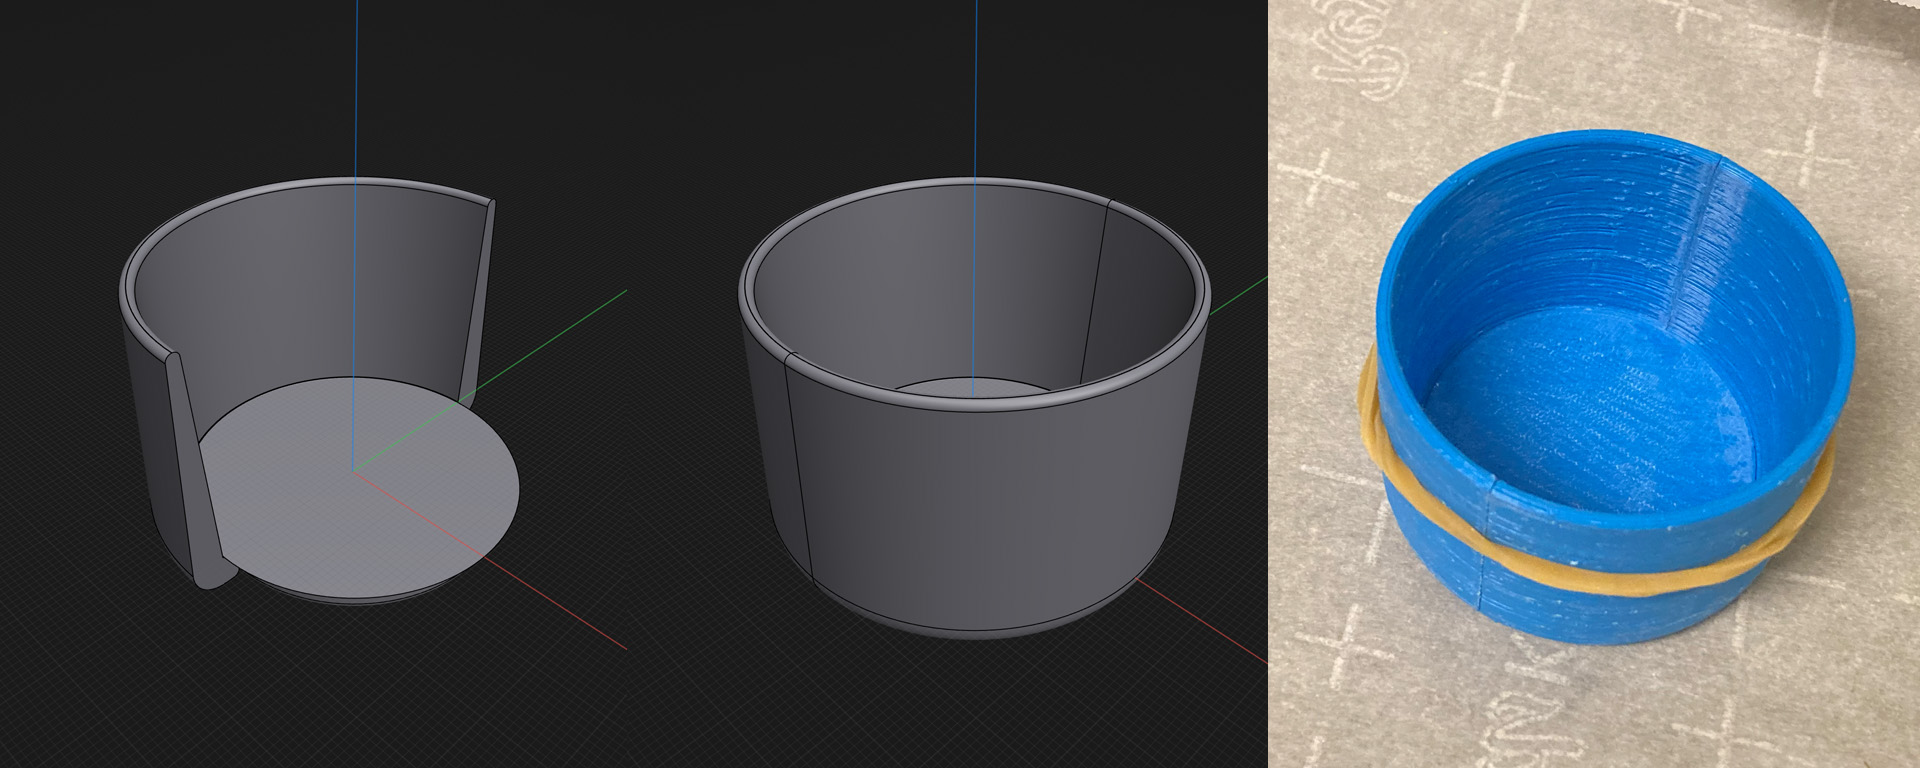 Two renderings and a photo: 1) a small cup with a line bifurcating the cup vertically, 2) the same cup with one half hidden to show the base and the remaining half cup and 3) a photo of the final cup with a rubber band bound around the mold to keep it together